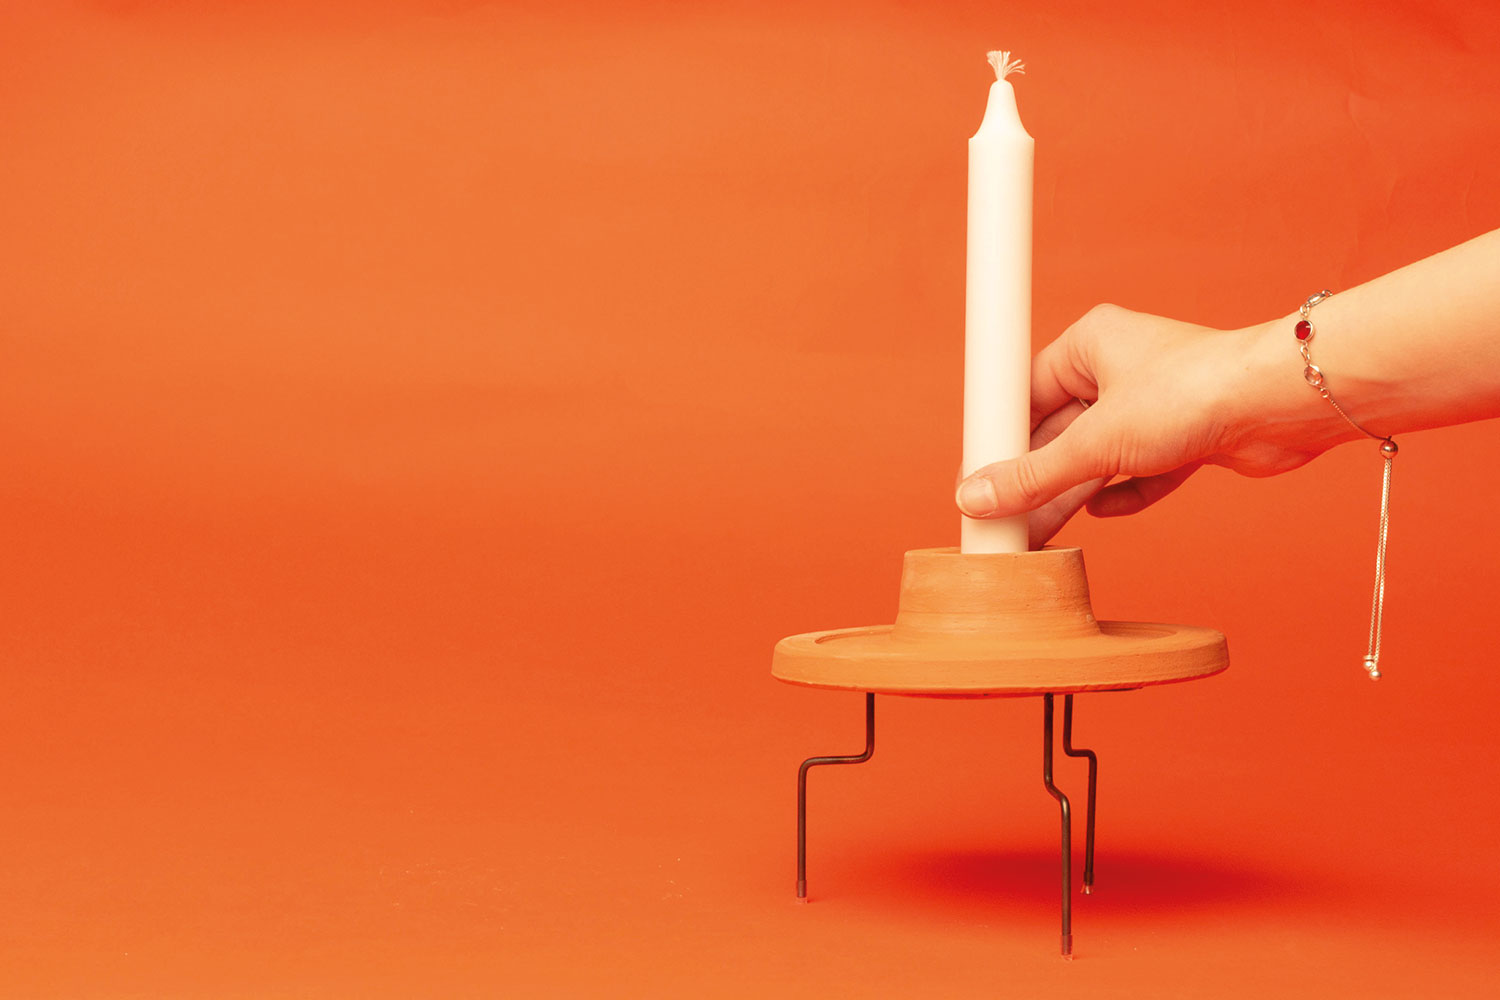 A hand places a white candle into an orange candle stick holder.